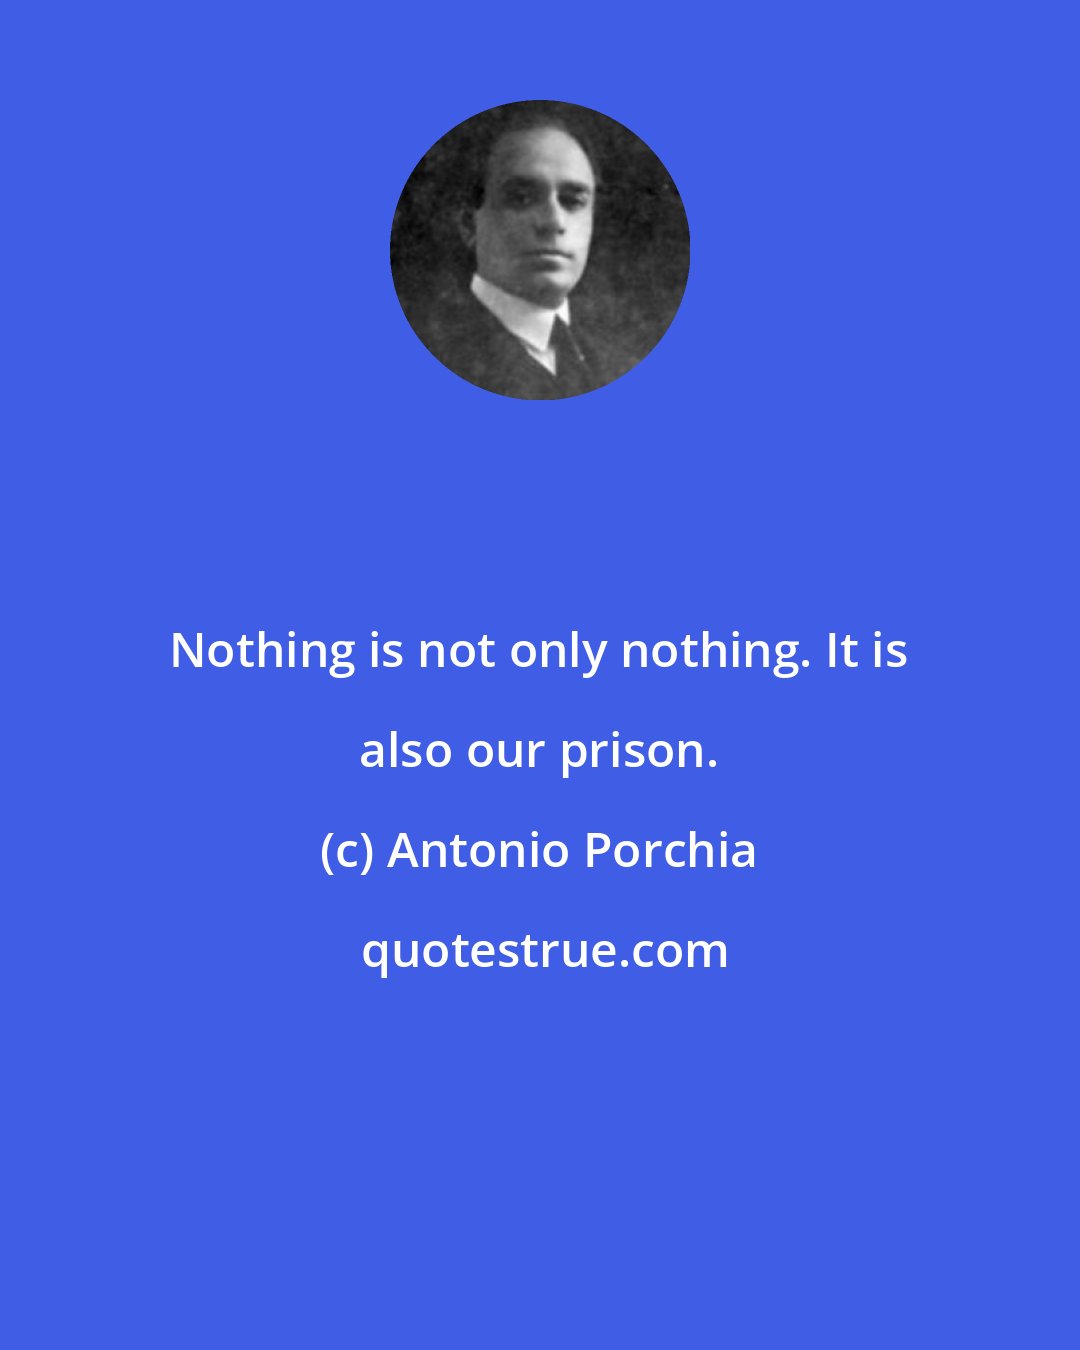 Antonio Porchia: Nothing is not only nothing. It is also our prison.